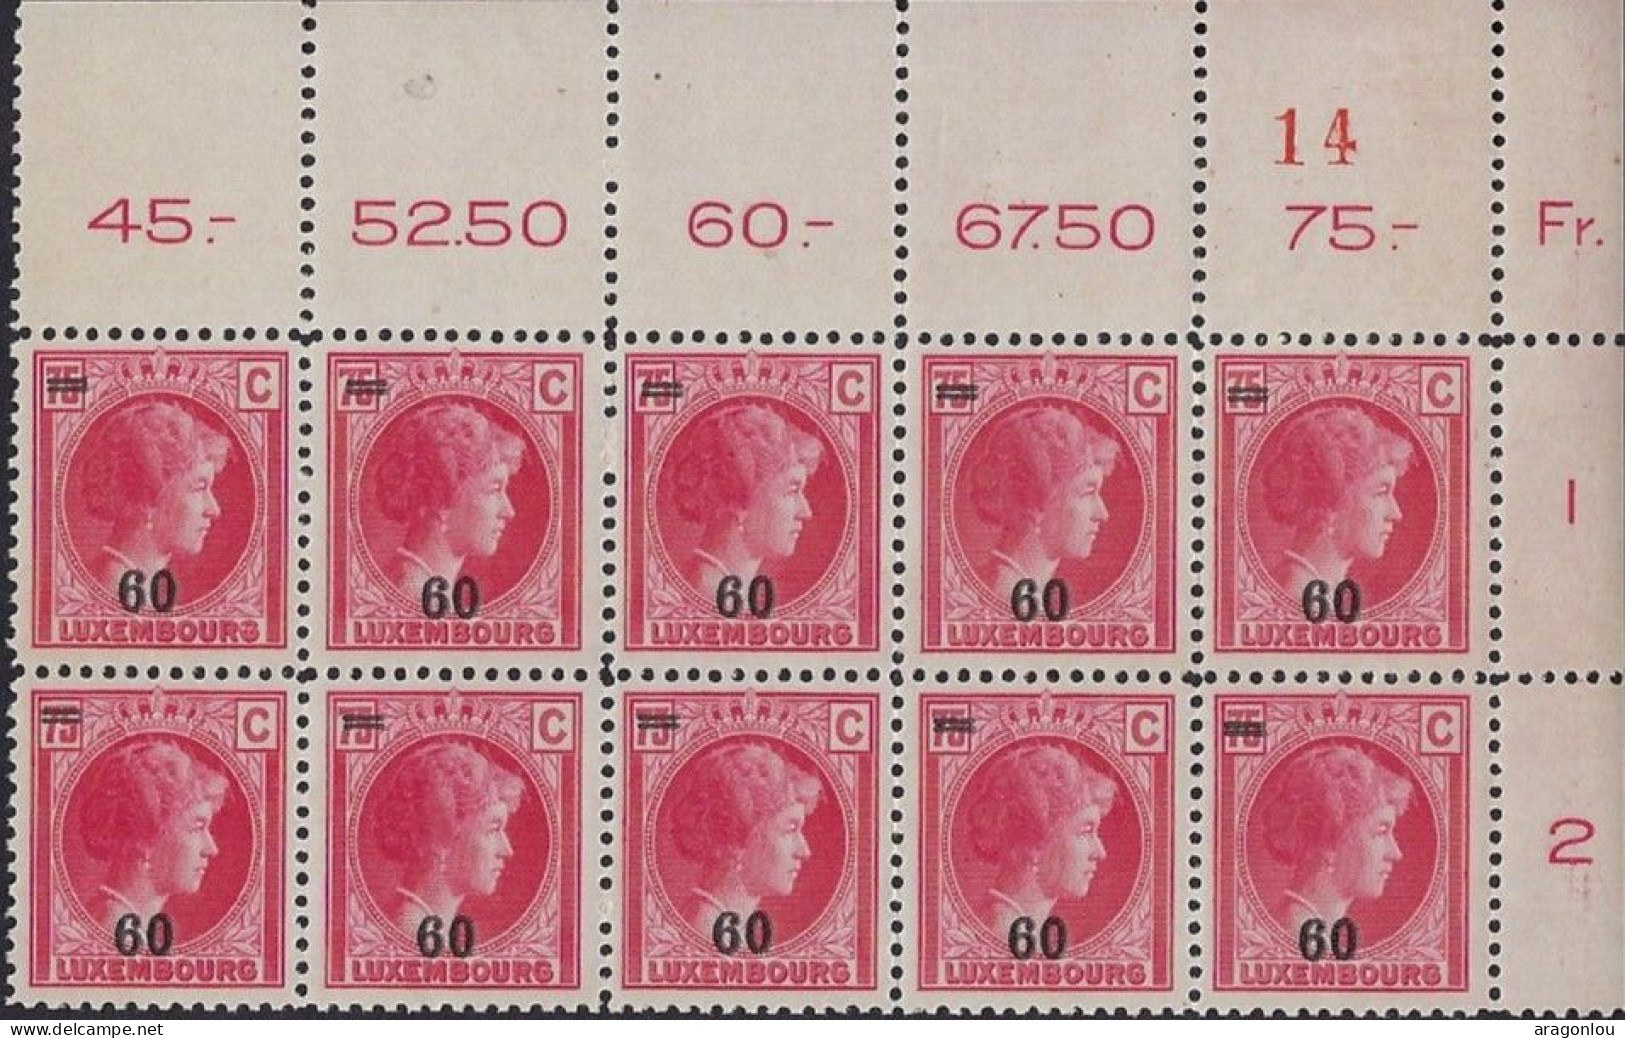 Luxembourg - Luxemburg - Timbres - Bloc à 10   Charlotte    MNH** - 1926-39 Charlotte Rechtsprofil